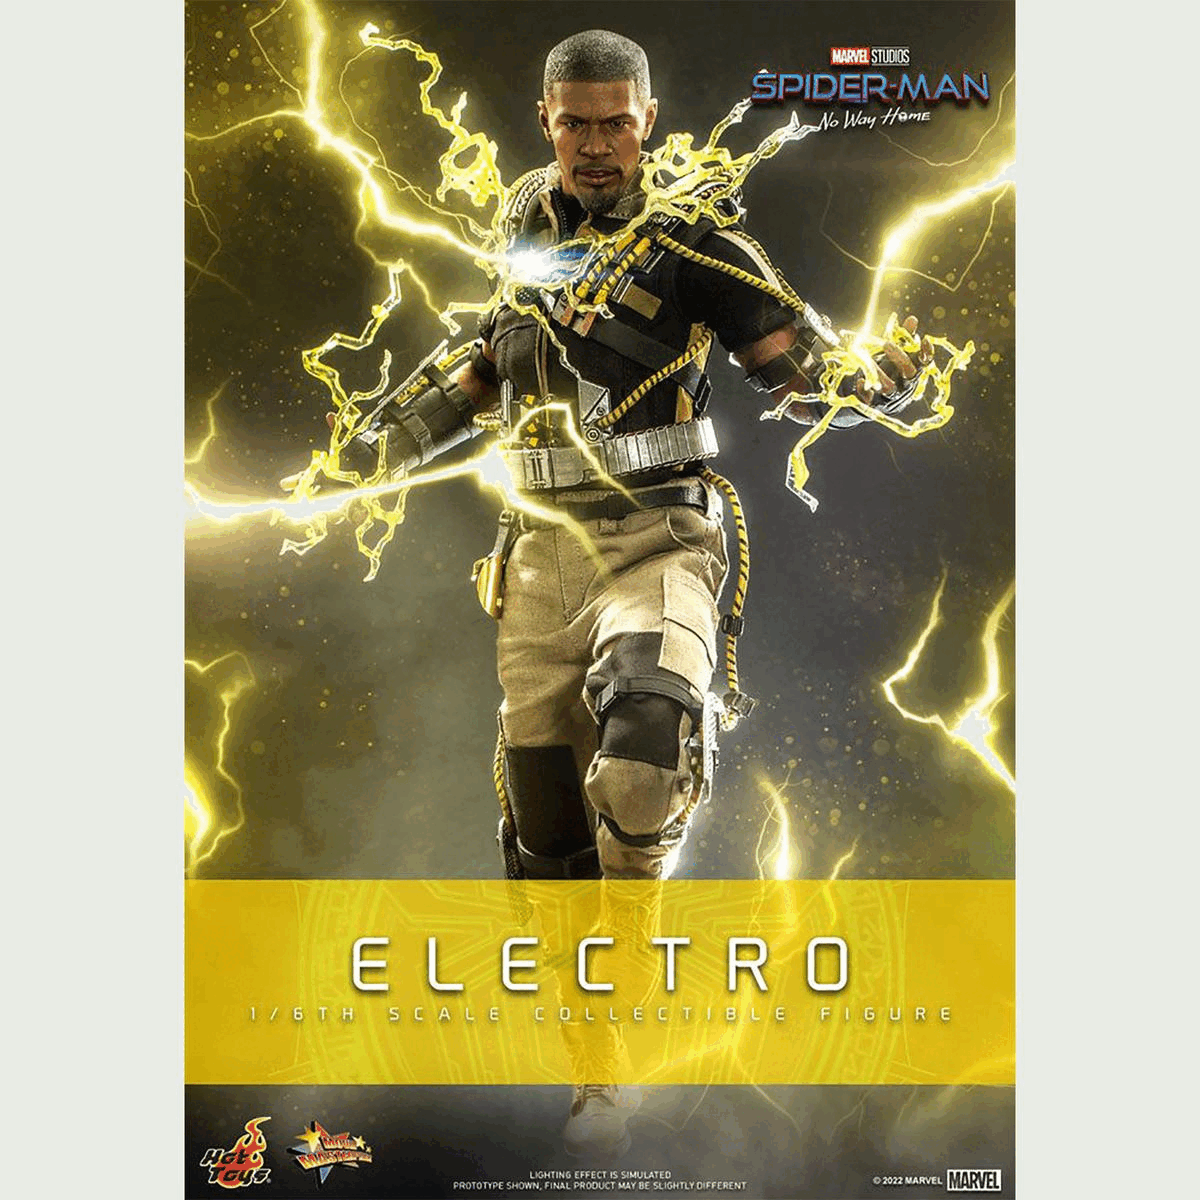 Gif showing the Electro statue in different poses. Text on screen reads, Marvel Studios Spider Man No Way Home. Electro 1/6th scale collectible figure. Hot Toys. Lighting effect is sumulated, prototype shown, final product may be slightly different. Twenty twenty two Marvel.